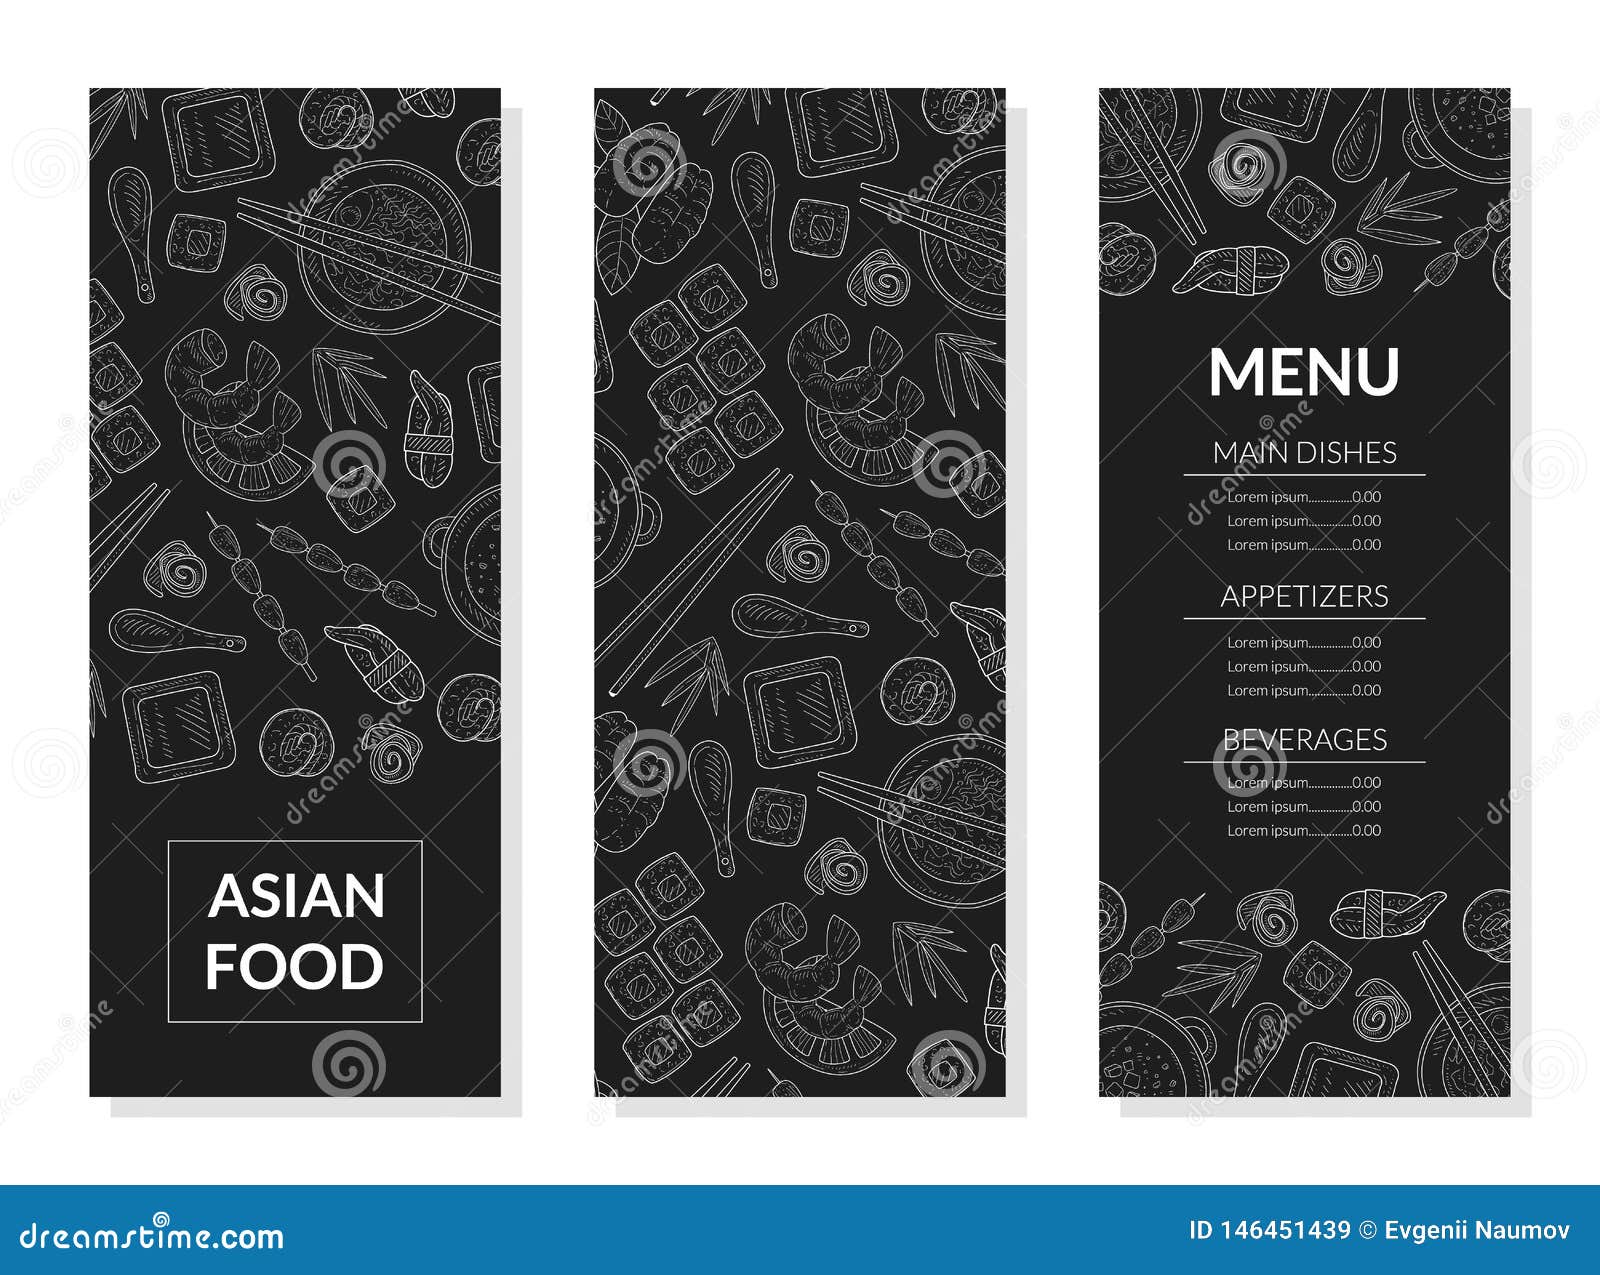 Asian Food Menu Template, Main Dishes, Appetizers, Beverages of Throughout Asian Restaurant Menu Template